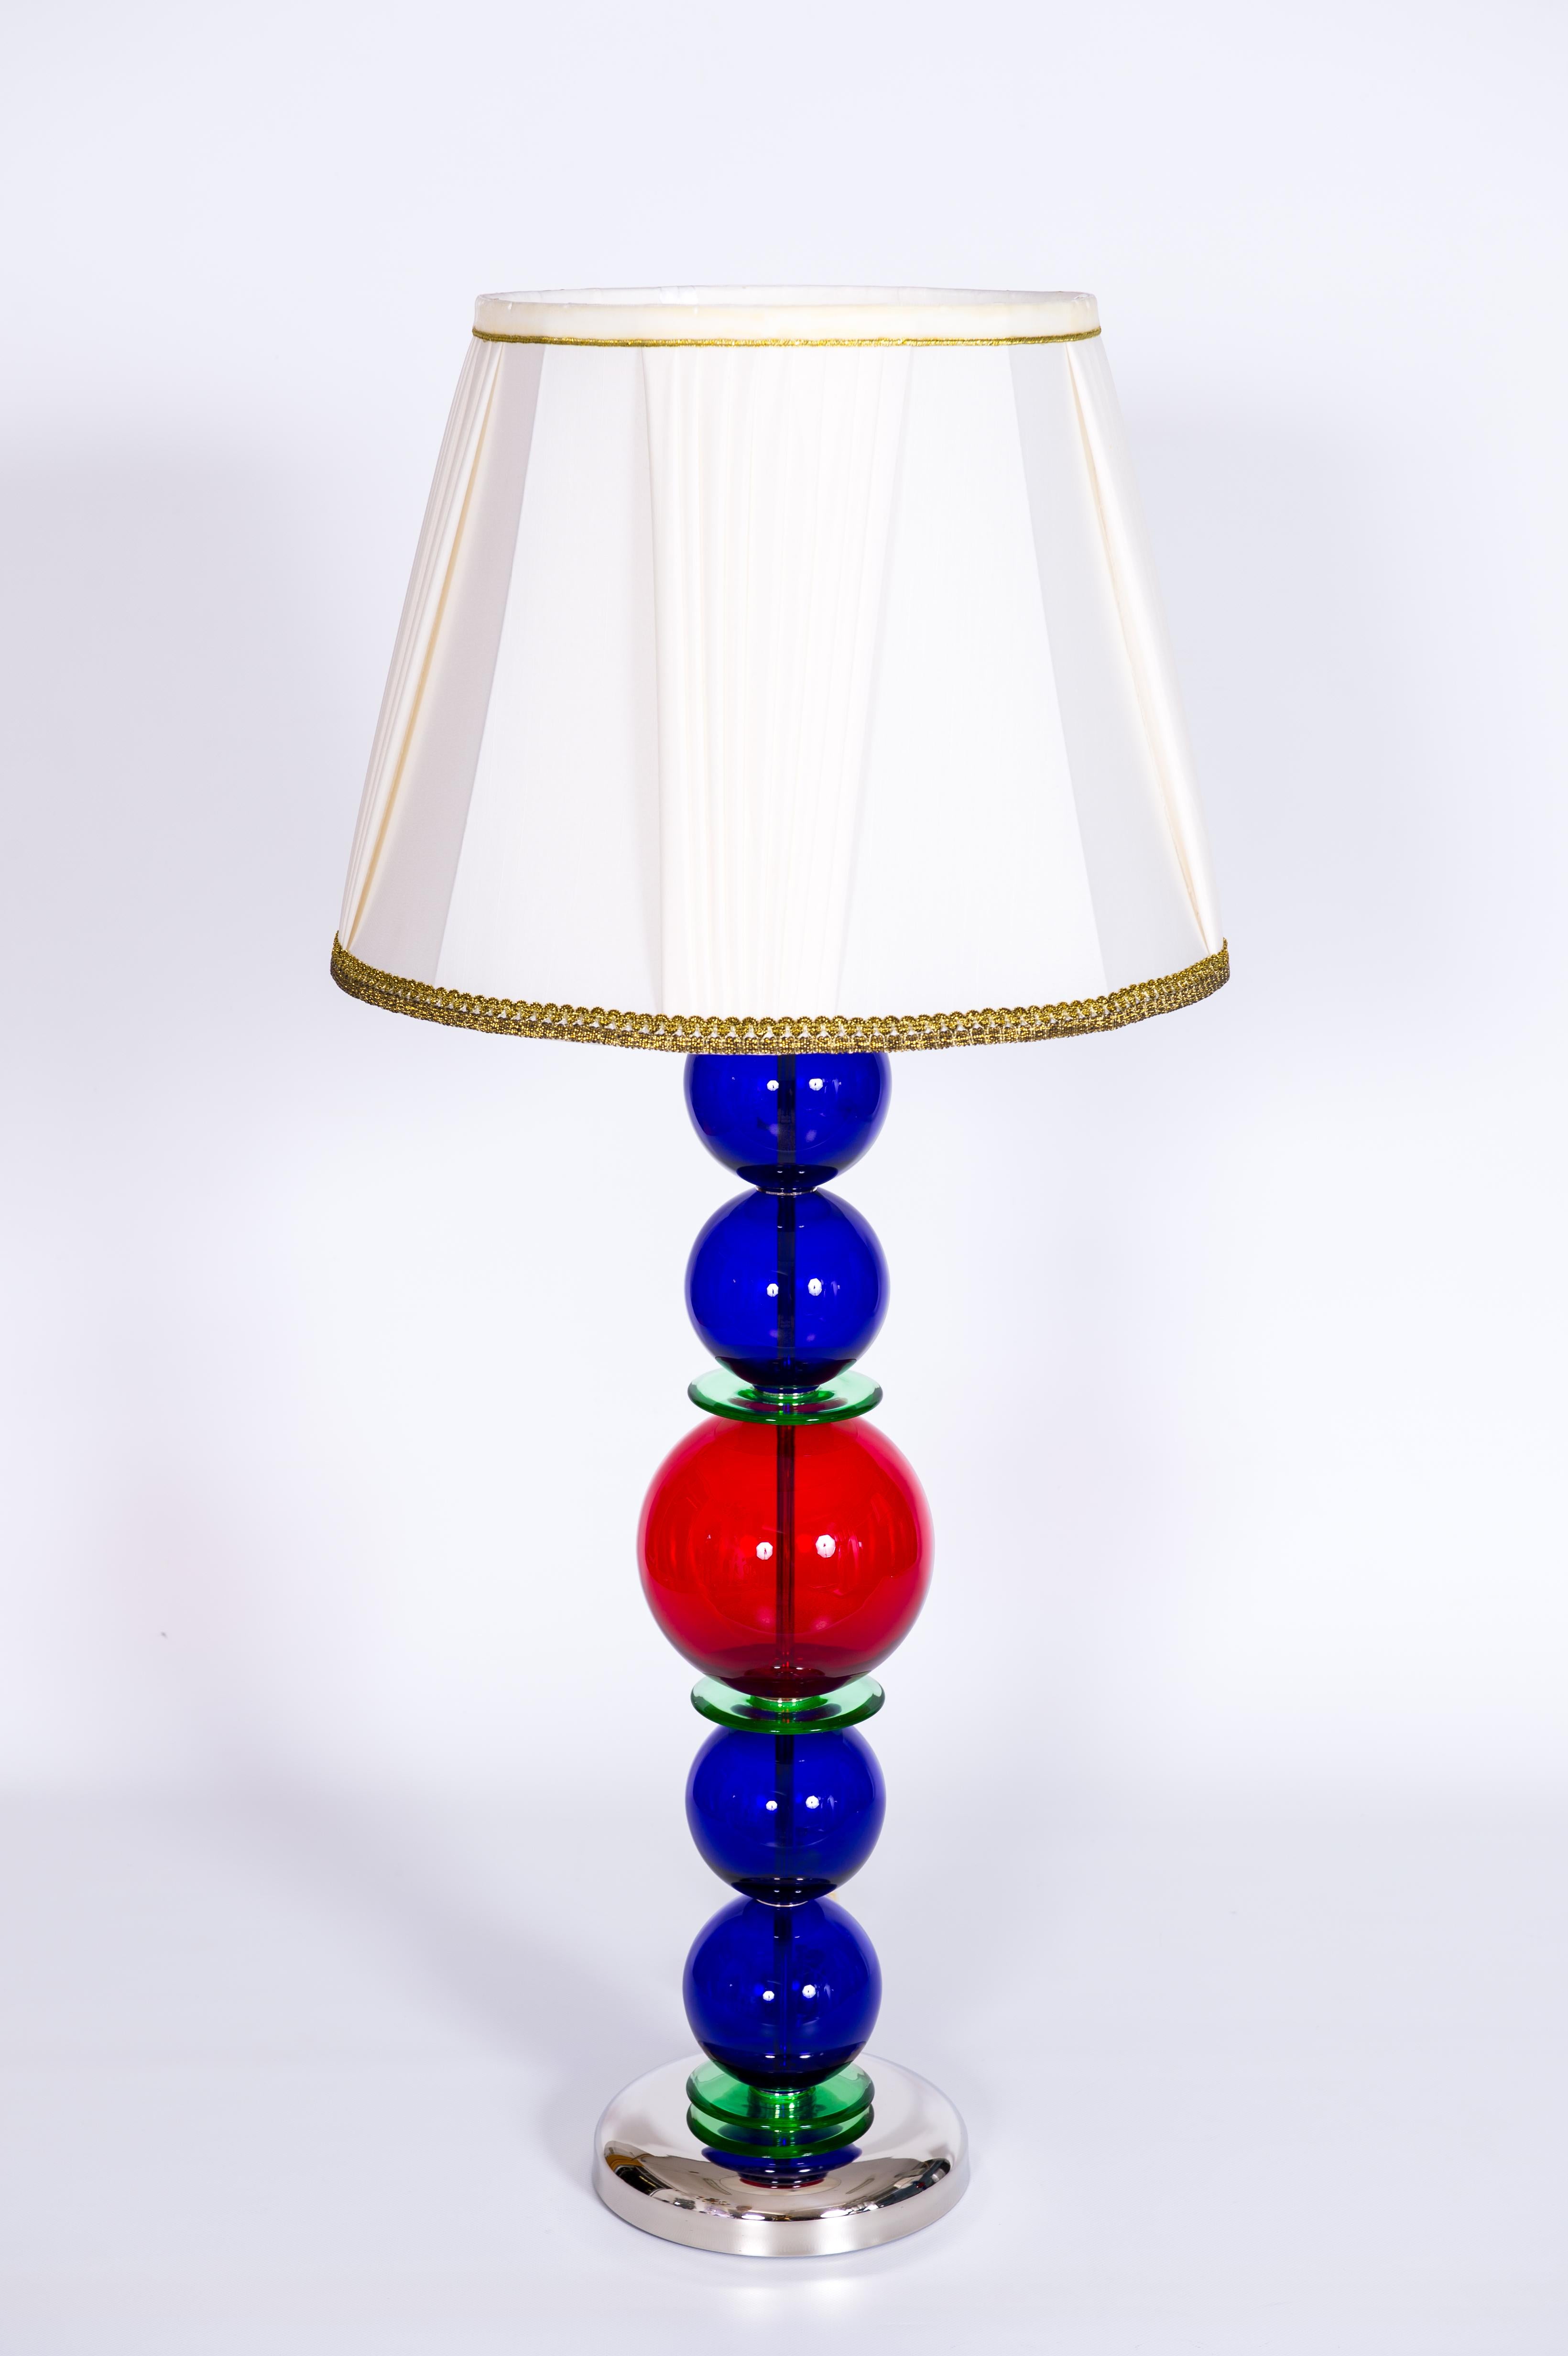 Customizable Monumental Murano Glass Table Lamps with Vibrant Hues, Contemporary Italy.
These awe-inspiring Murano glass table lamps, meticulously crafted by Italian artisans, exemplify the vibrant artistry and craftsmanship of contemporary Italian